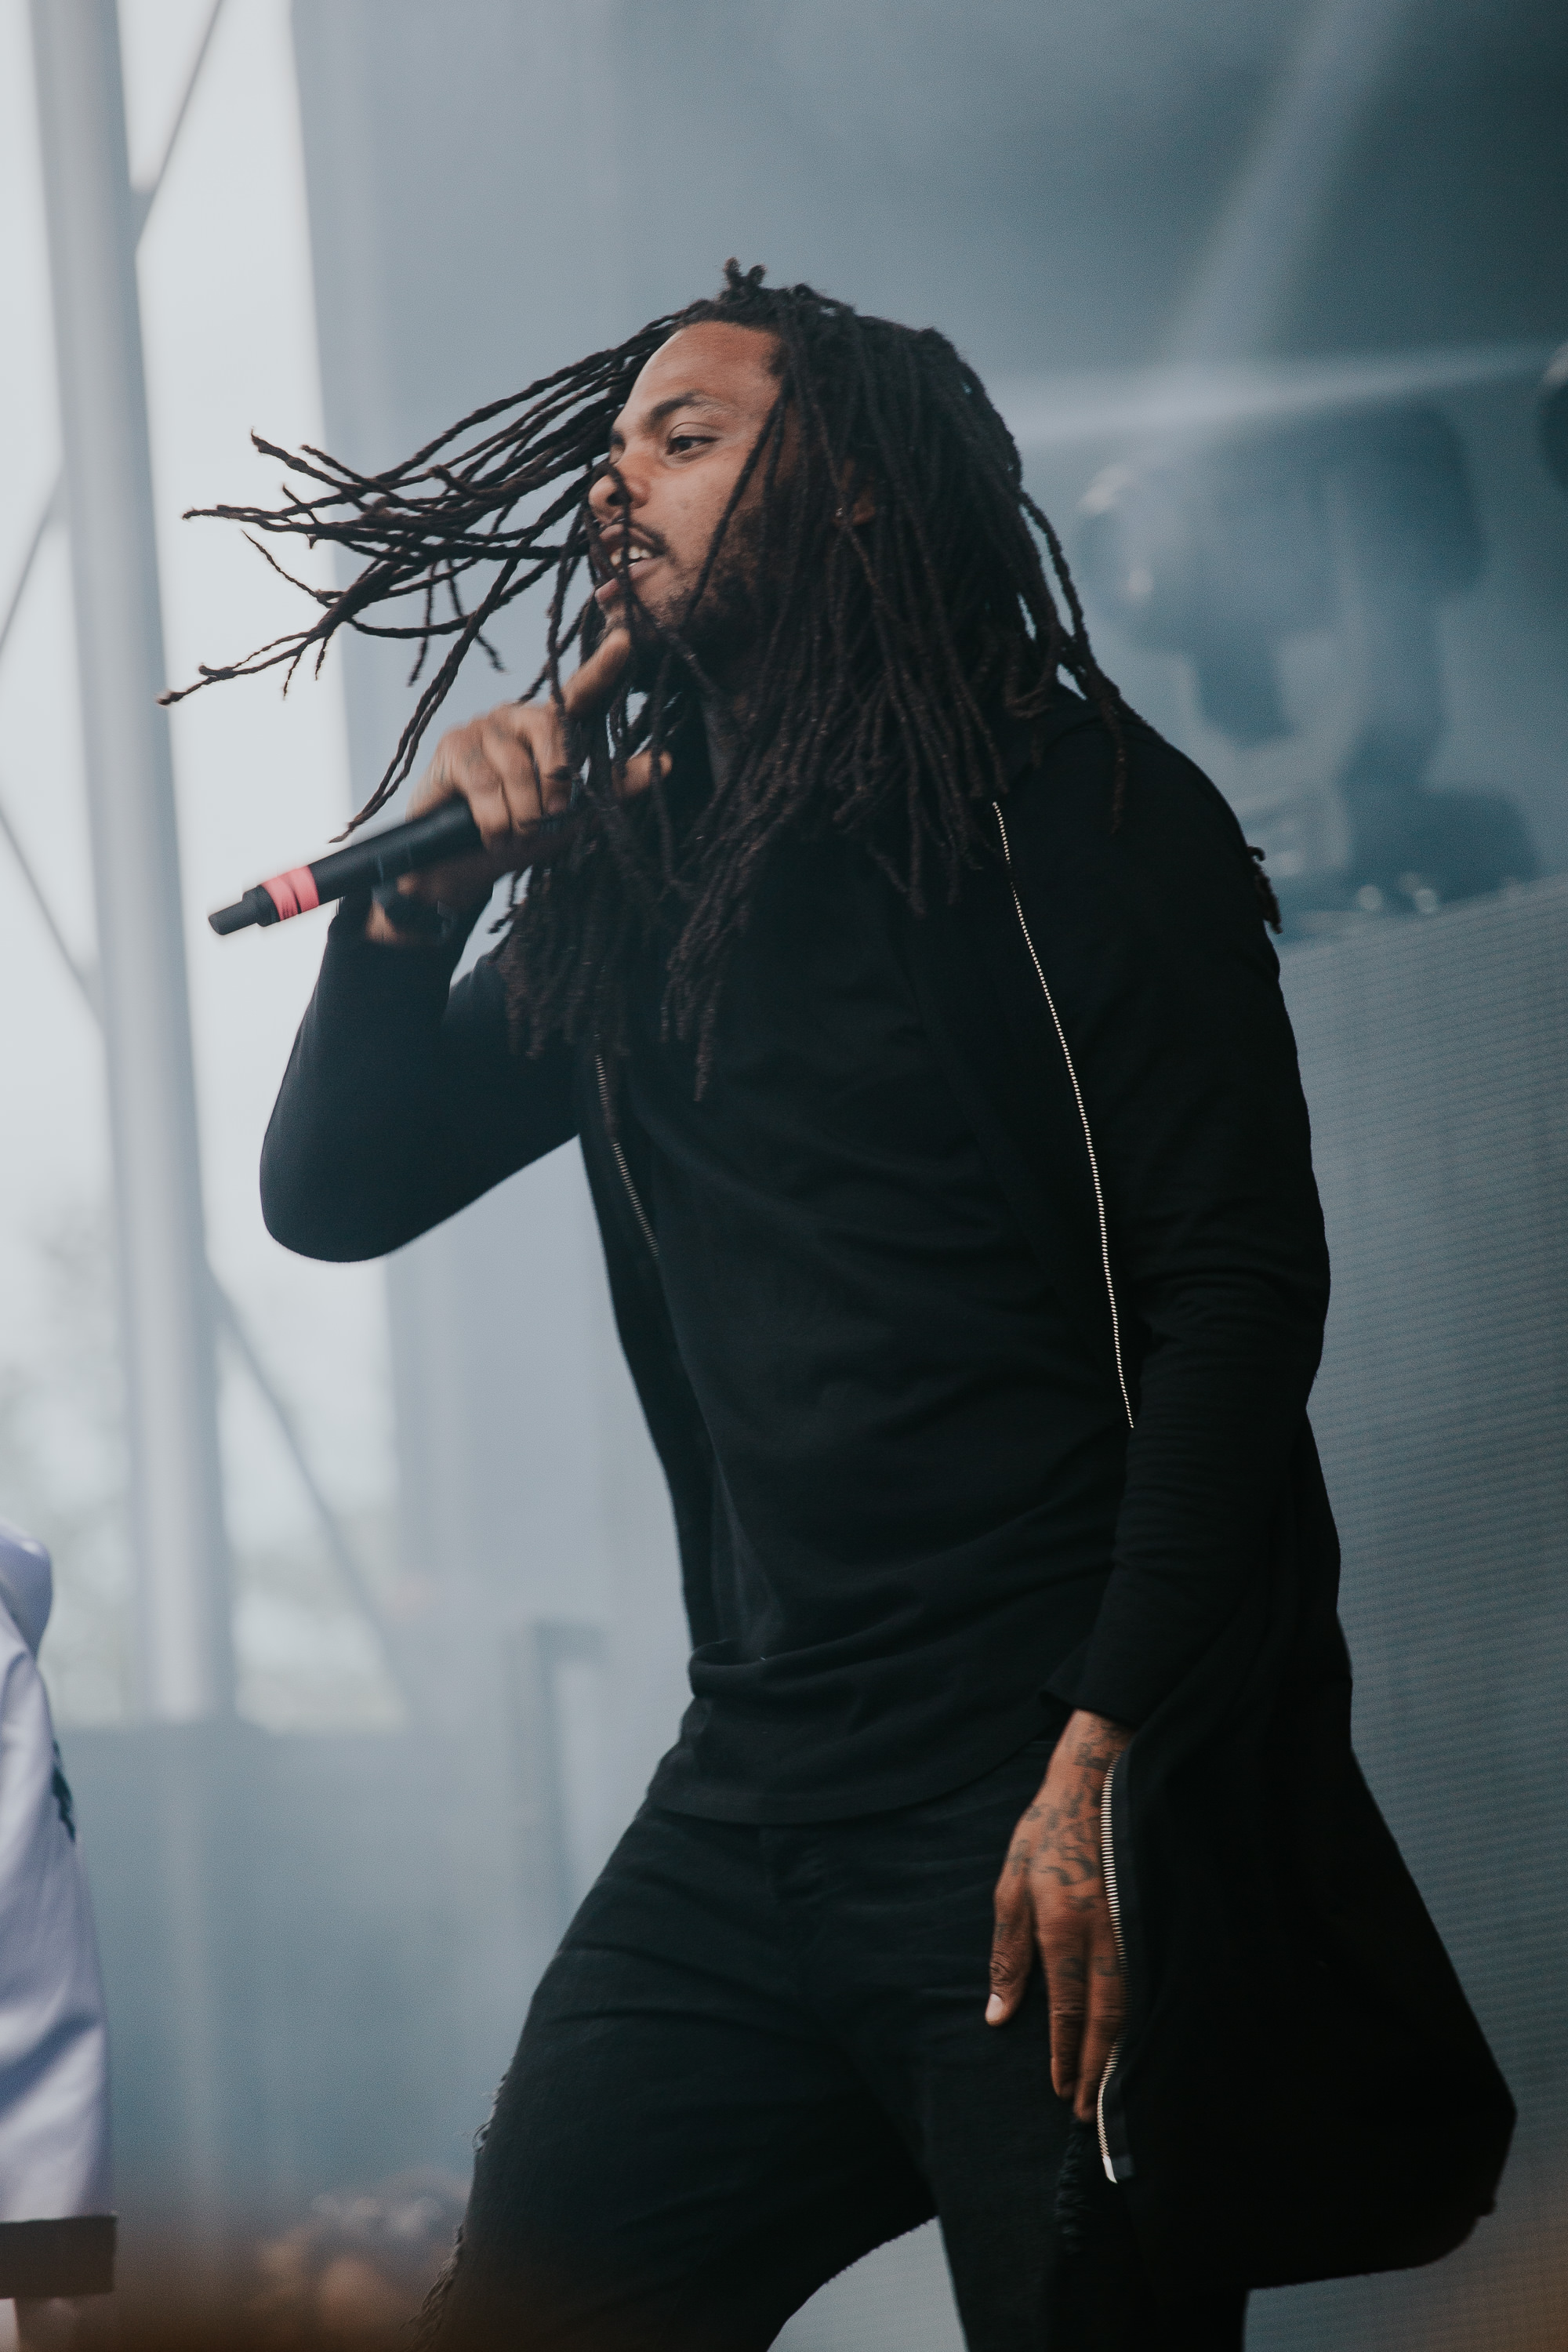 7_Belly_Waka_Flocka_Flame_Holland_Park_FVDED_Timothy_Nguyen_20160702 (5 of 13).jpg